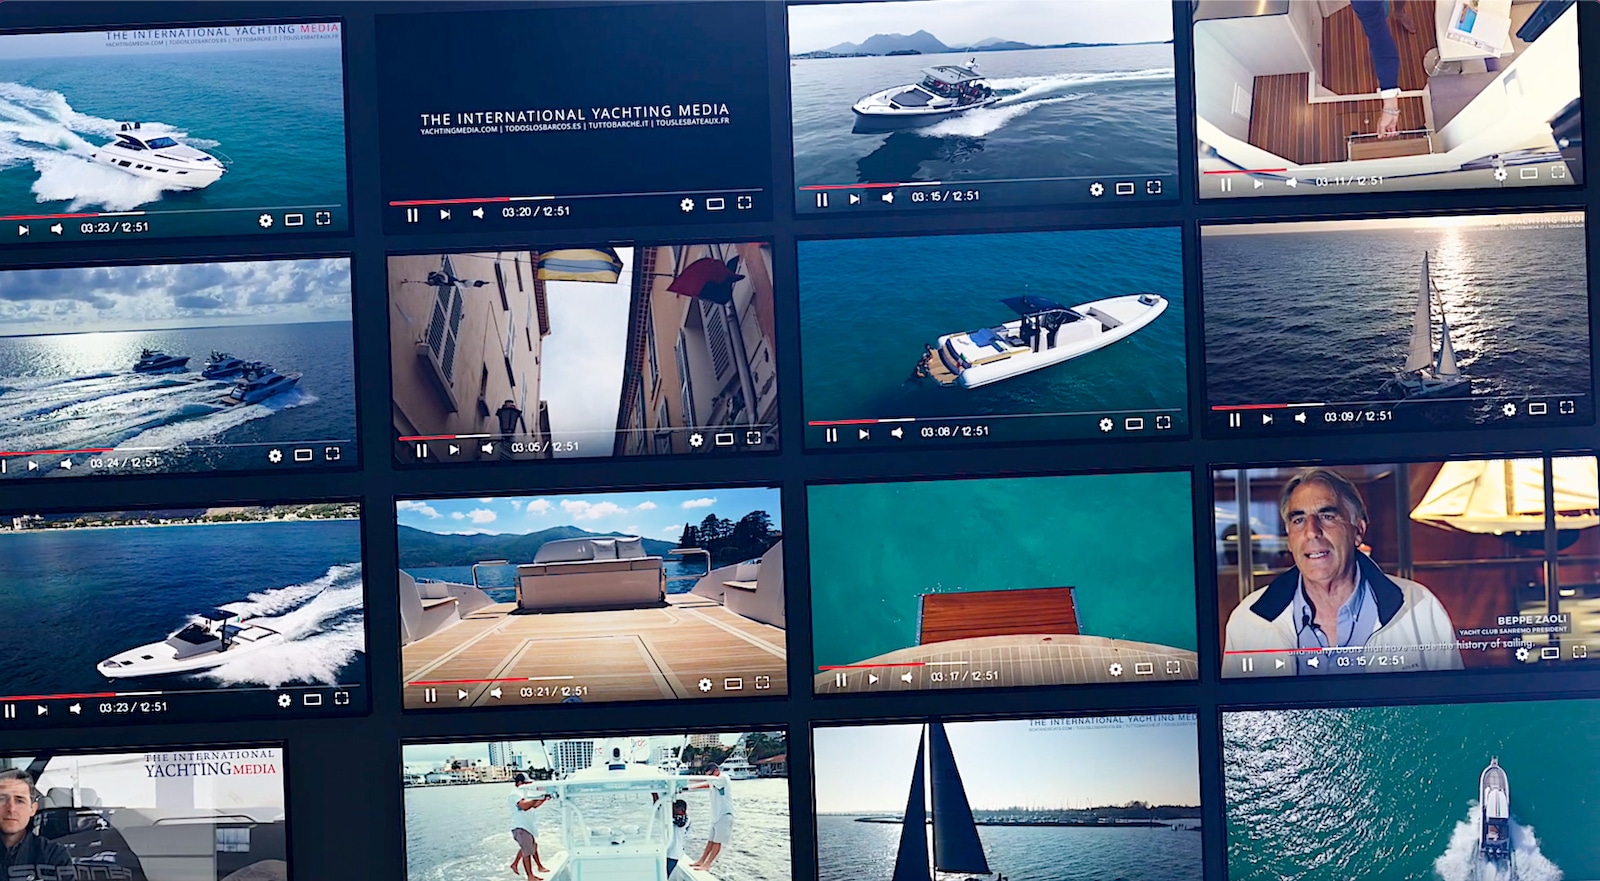 The International Yachting Media YouTube Channel